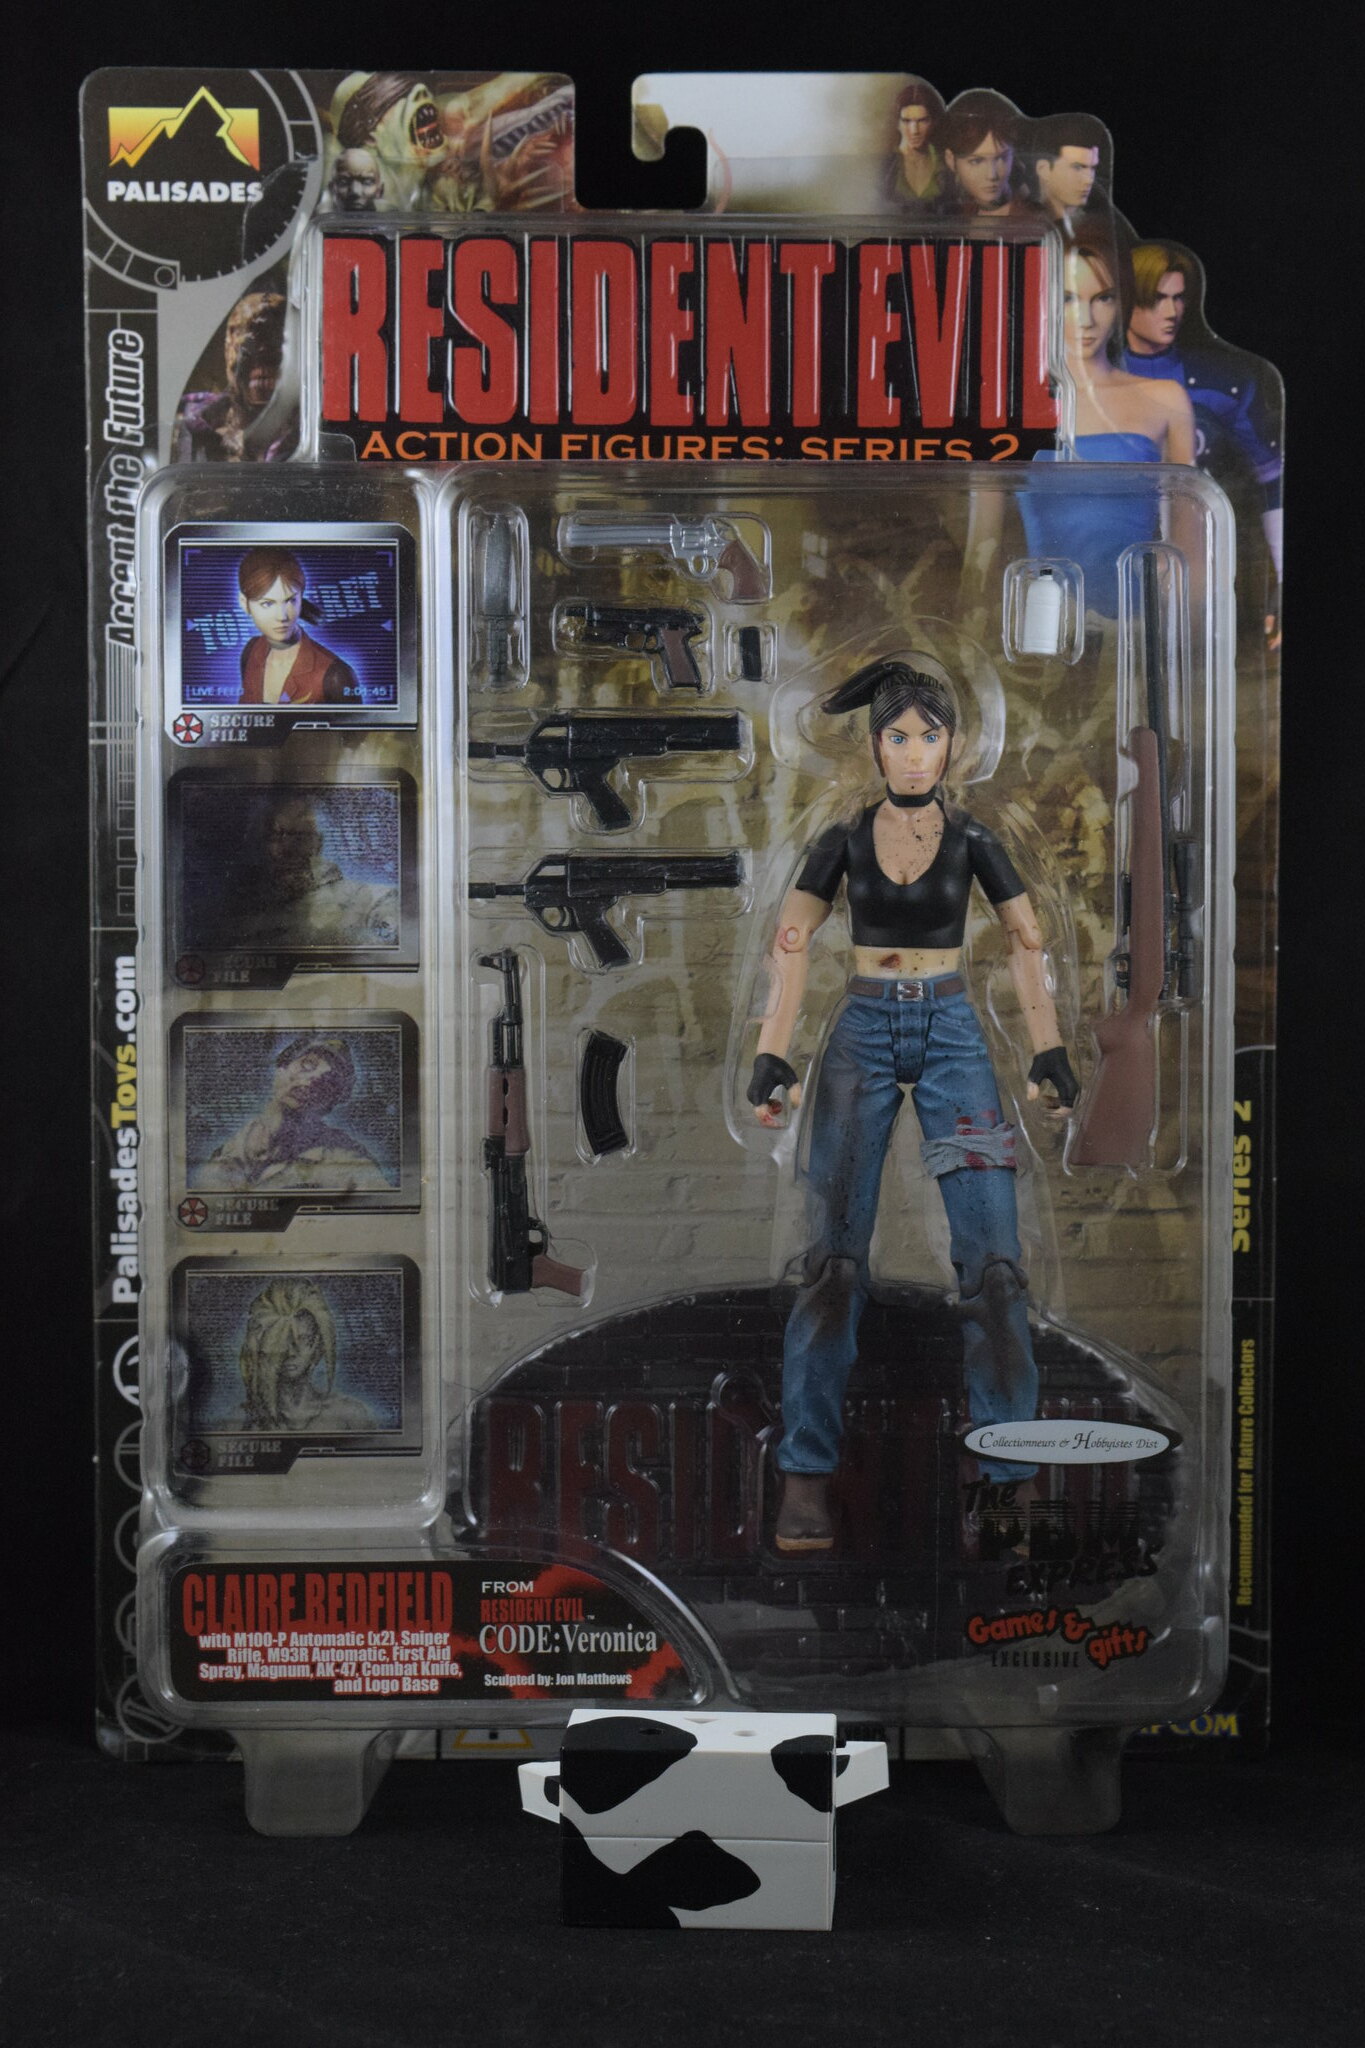 Claire Redfield Palisades 2001 Resident Evil Code Veronica Biohazard 2 Lot